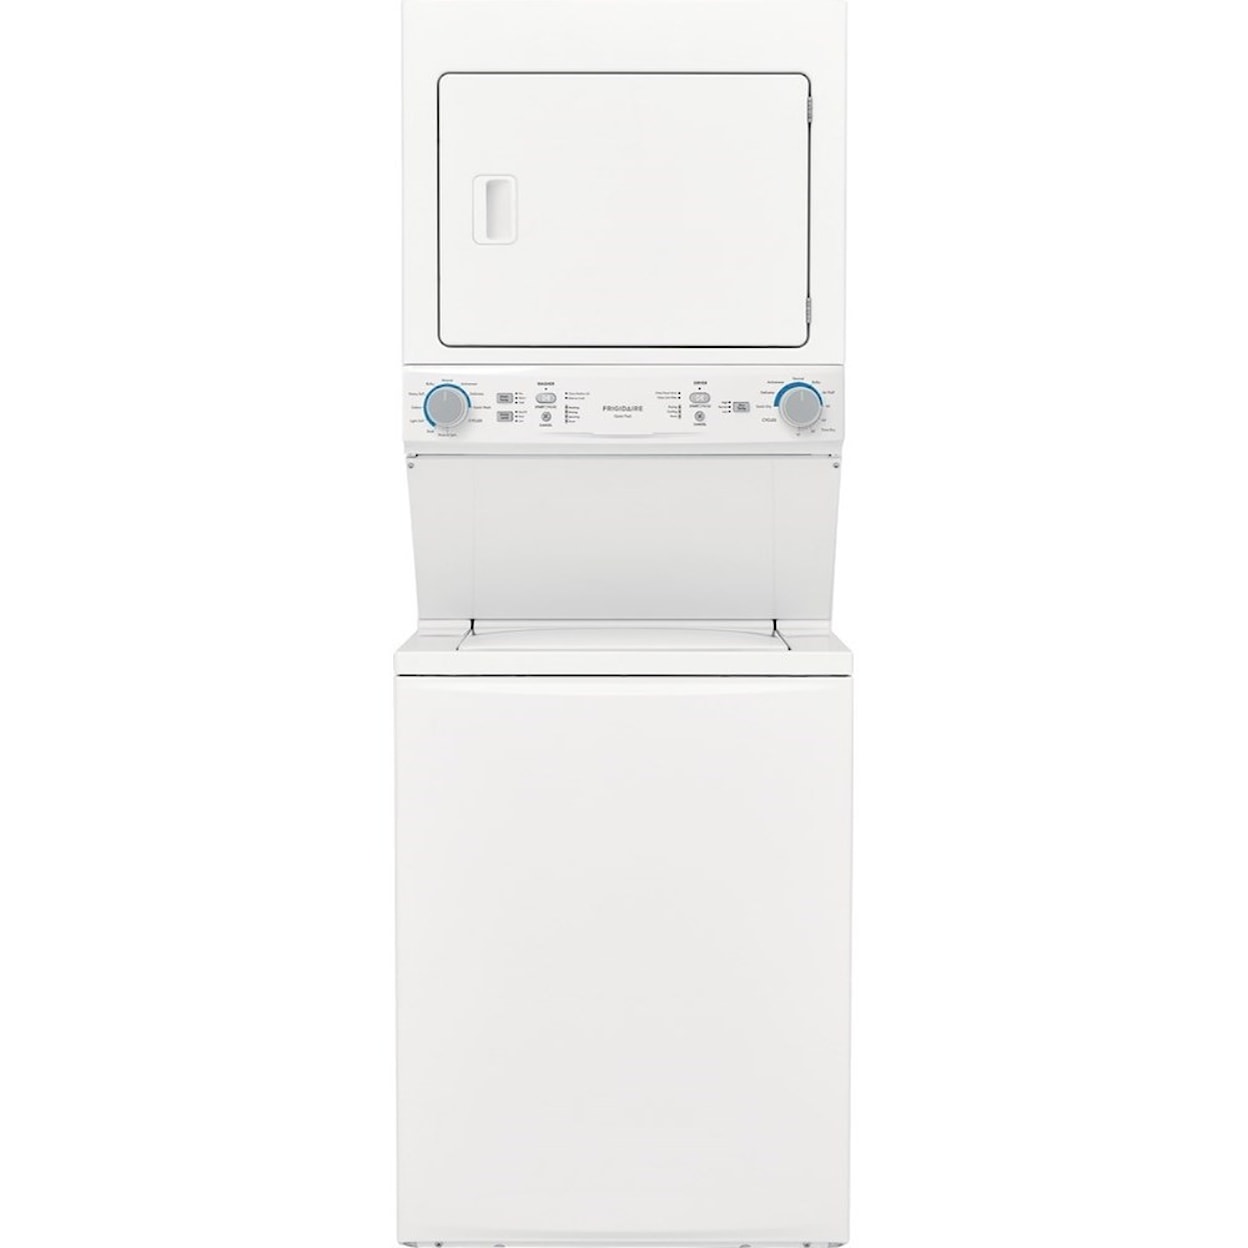 Frigidaire Washer and Dryer Combo Gas Washer/Dryer Laundry Center